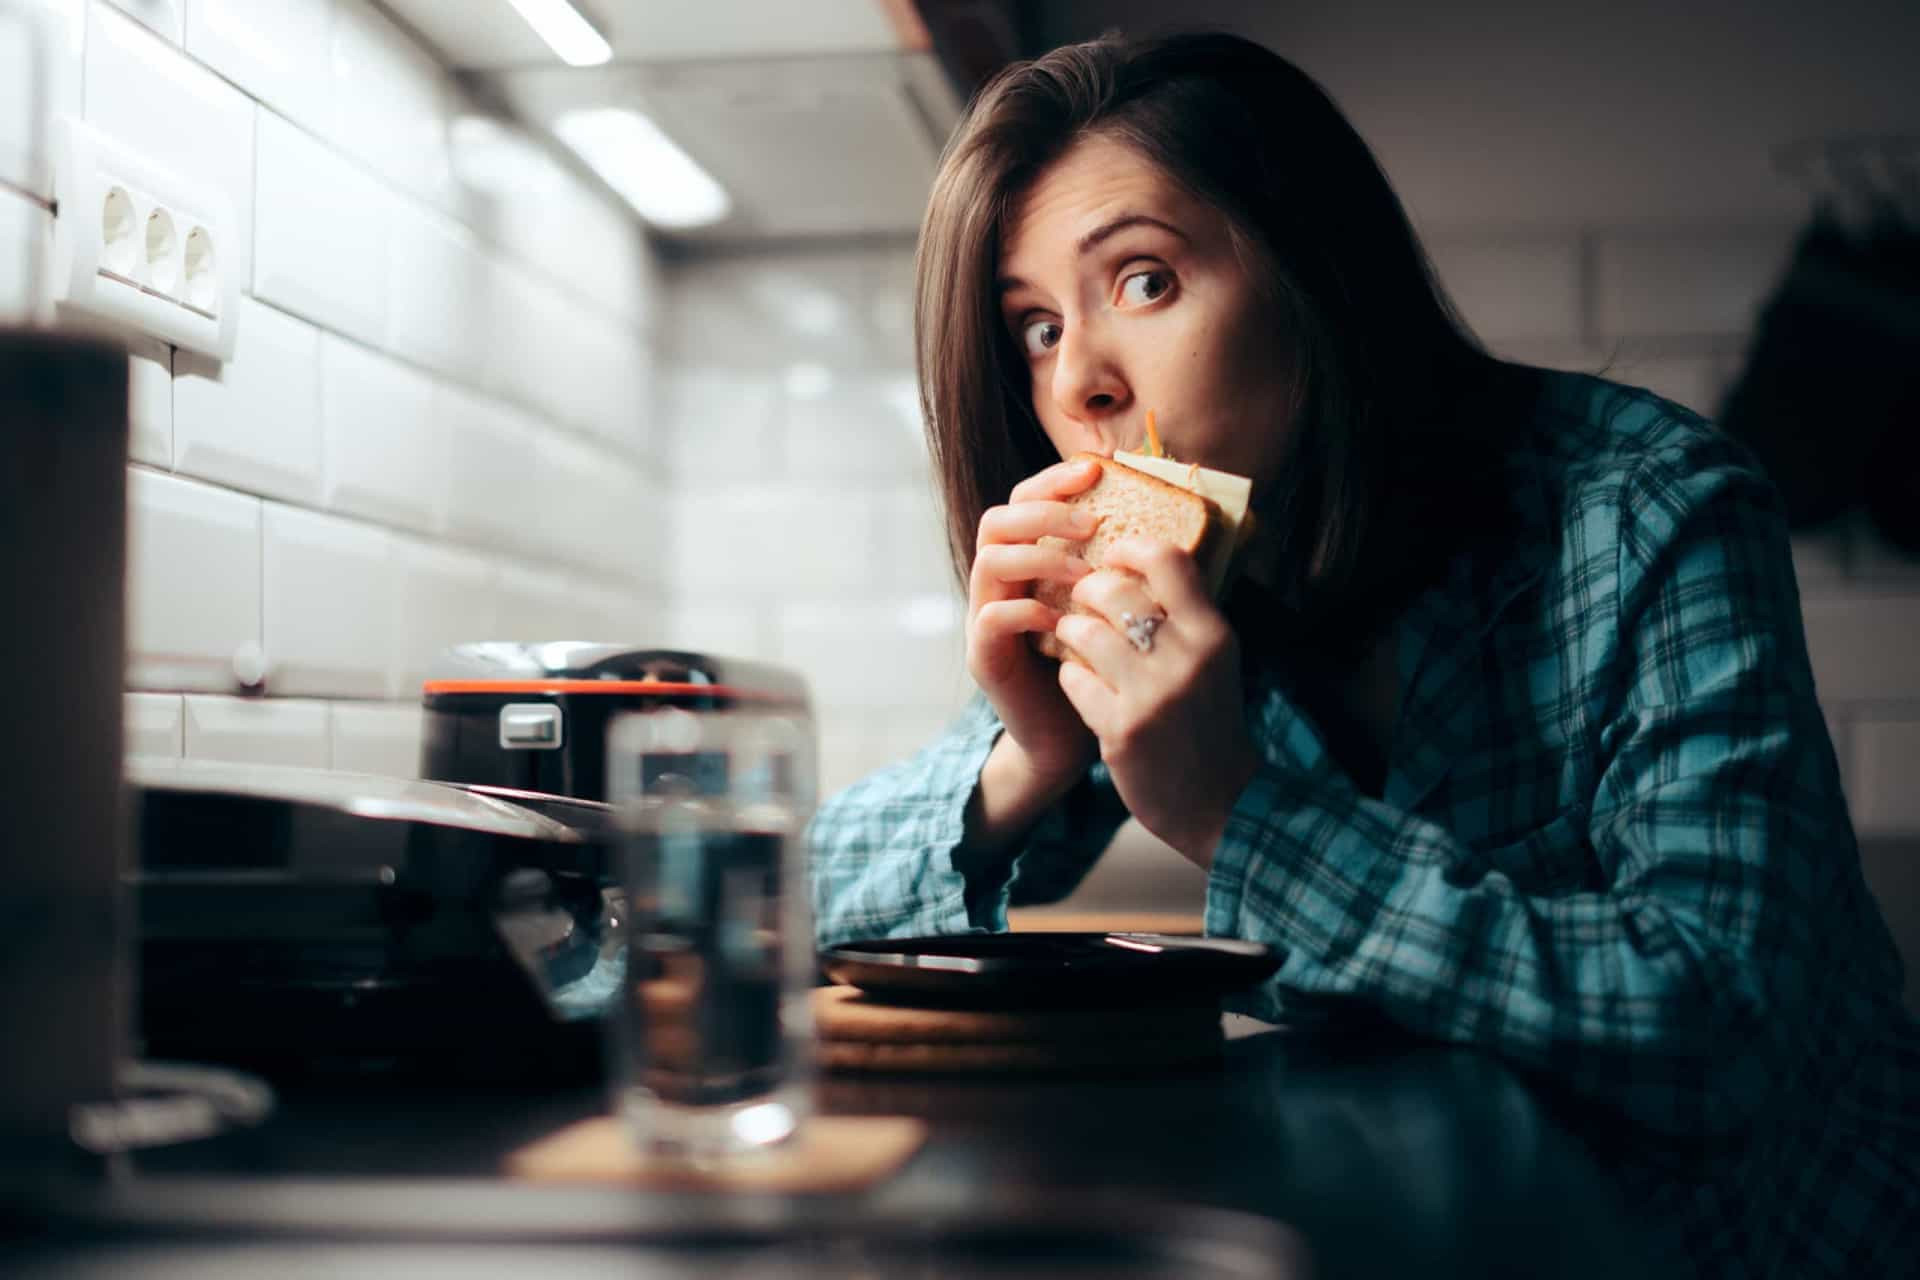 <p>Those with unhealthy beliefs about food and eating (e.g. people who believe they can’t control how much they eat) are also at higher risk of developing the disorder.</p><p>You may also like:<a href="https://www.starsinsider.com/n/319626?utm_source=msn.com&utm_medium=display&utm_campaign=referral_description&utm_content=508078en-en"> The shirtless blazer: Which star wore it best?</a></p>